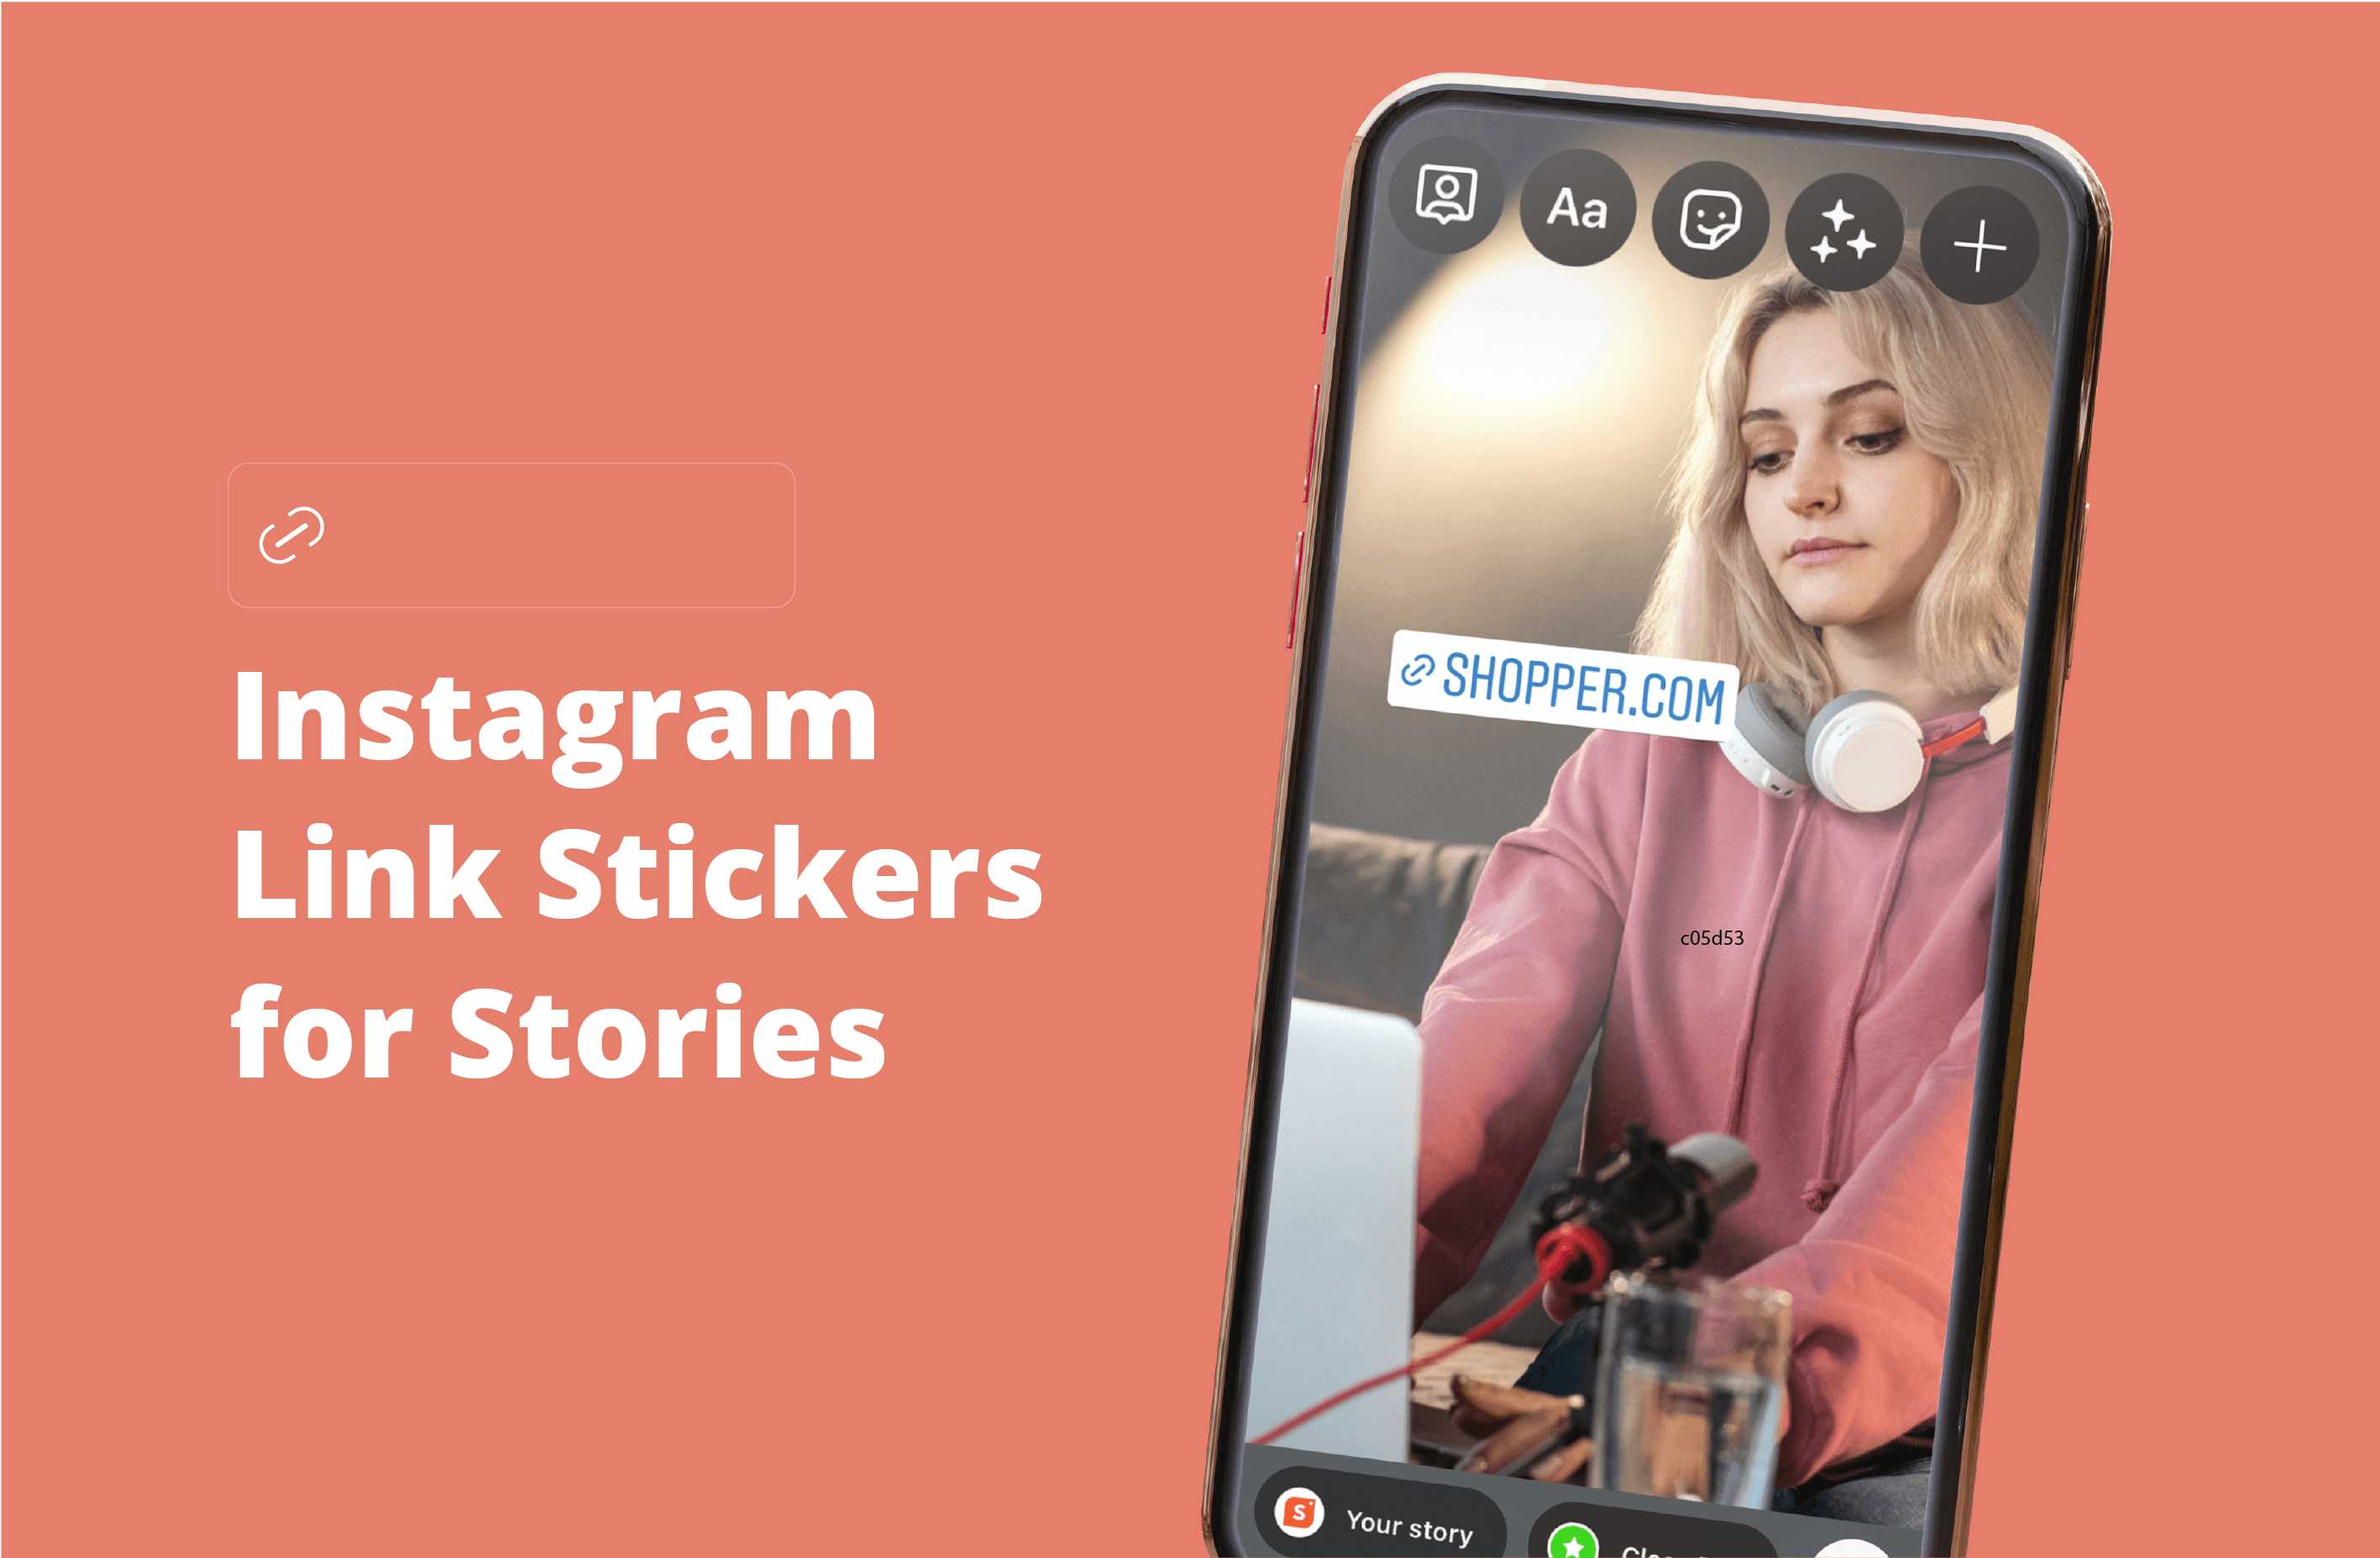 Instagram Now Offers Story Link Stickers for All Accounts